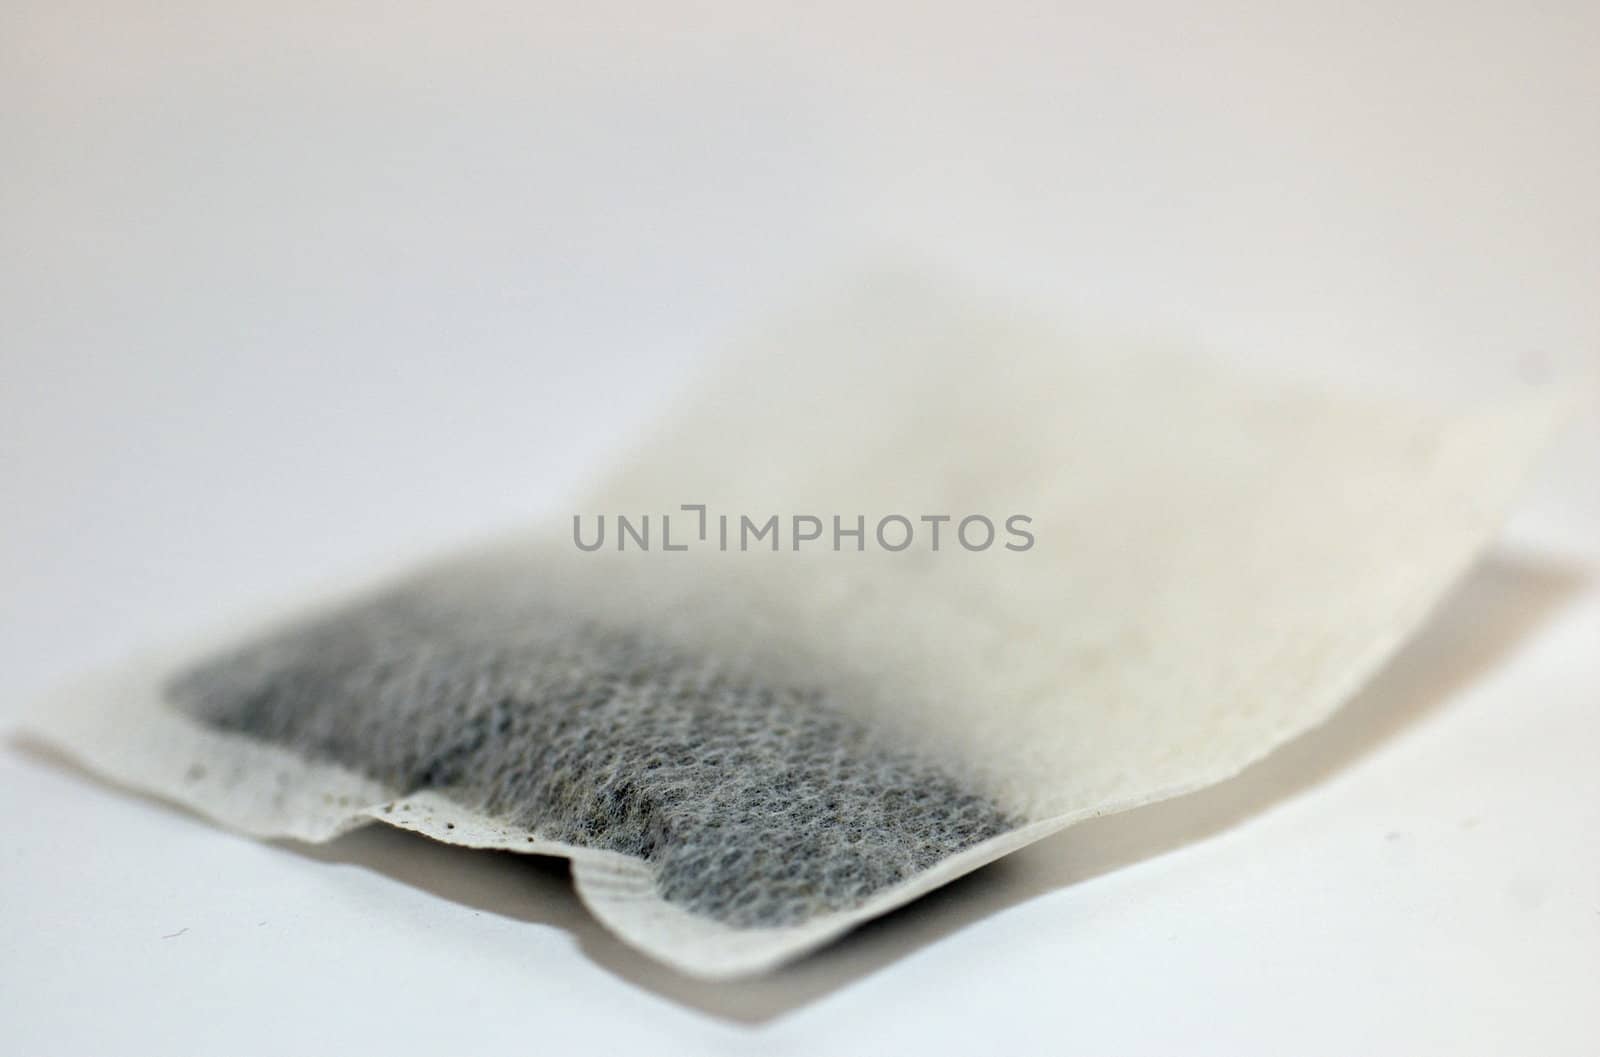 Isolated tea bag against white background with copy space